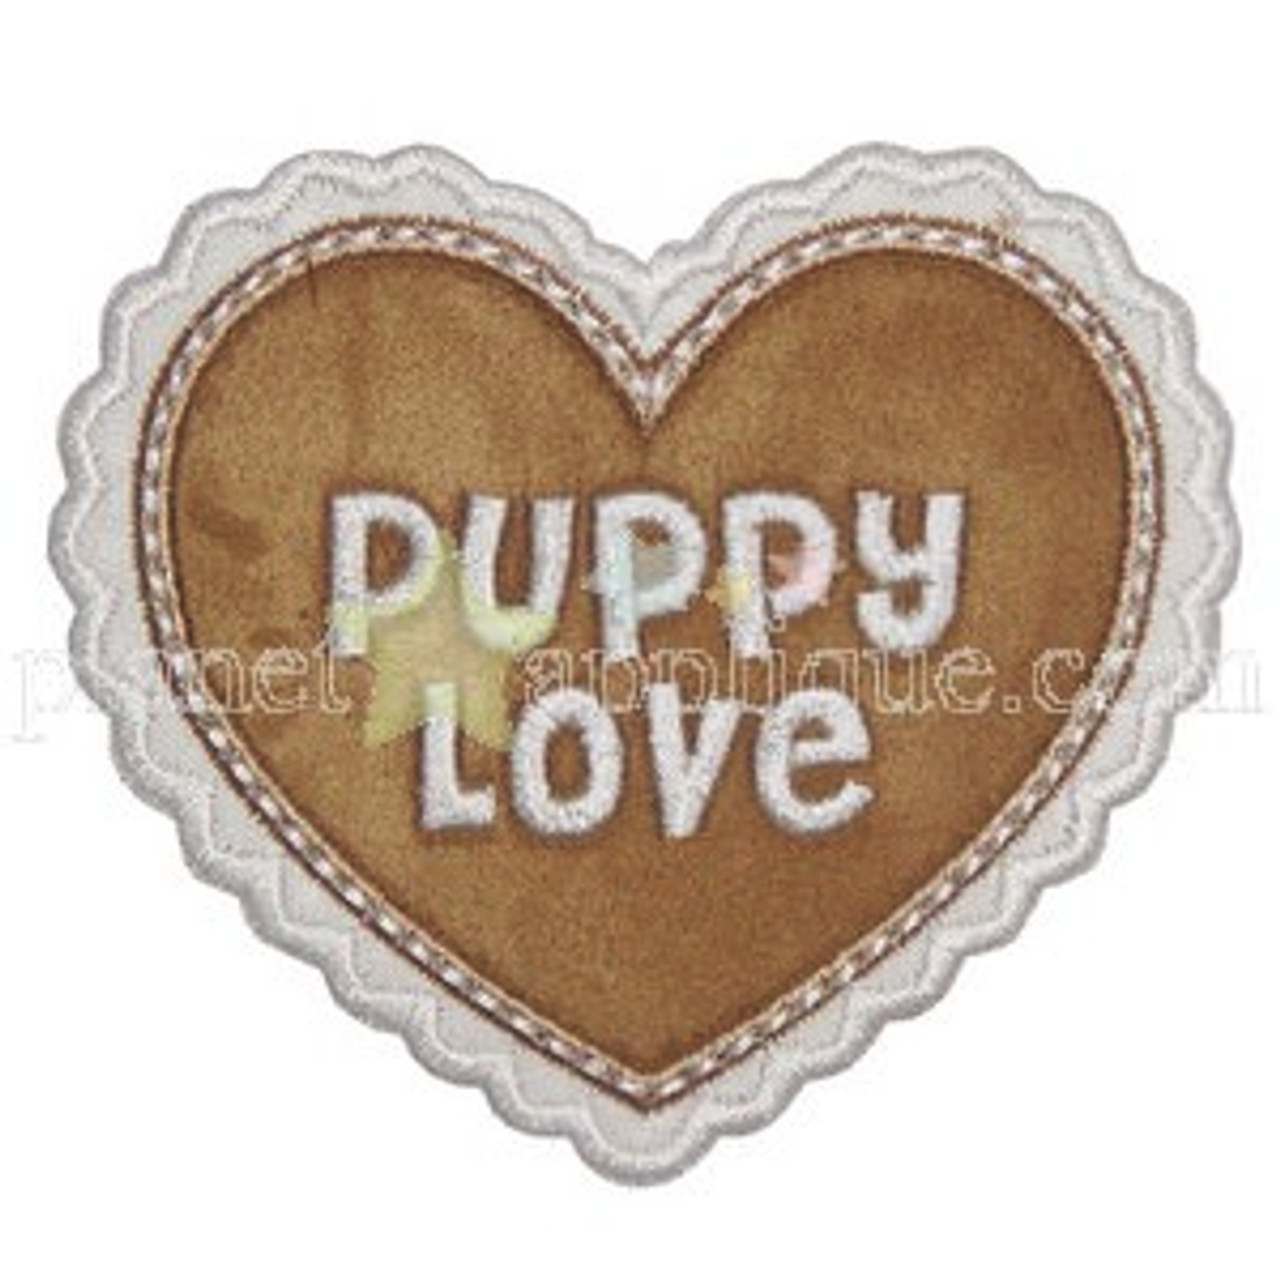 Love heart embroidery design available in two sizes